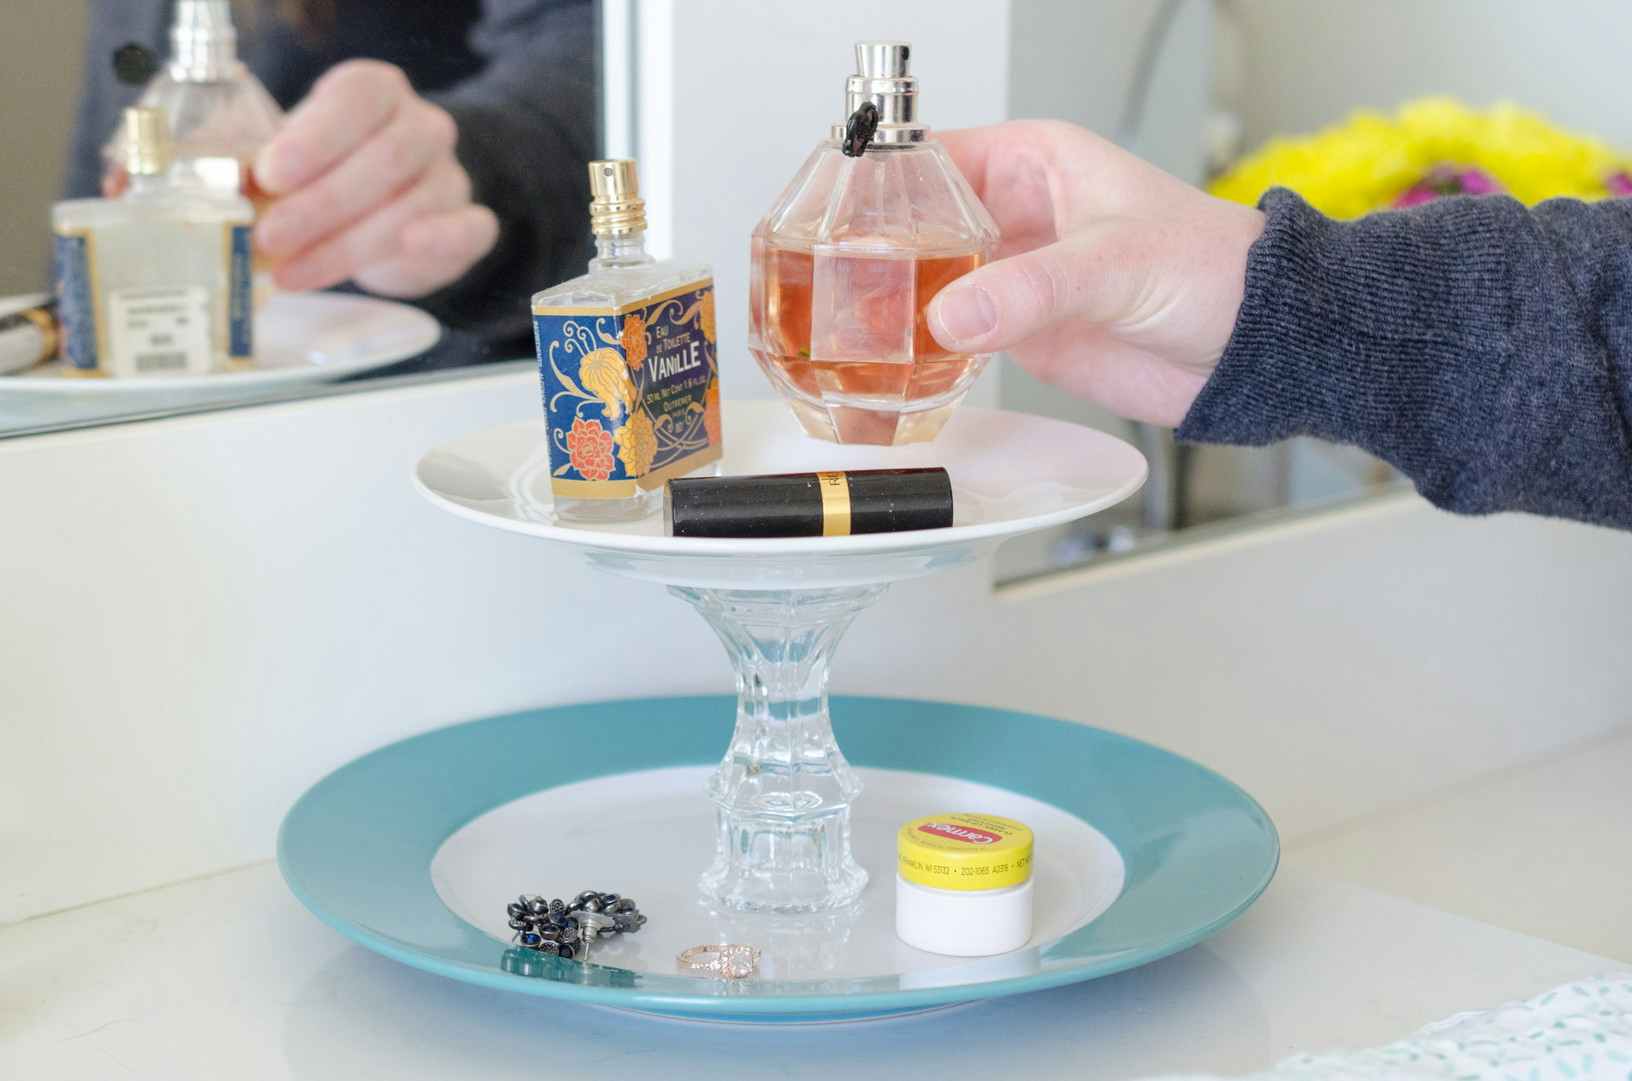 a person placing a perfume bottle on a diy tray from glued plates to candleholders for a tiered organizer